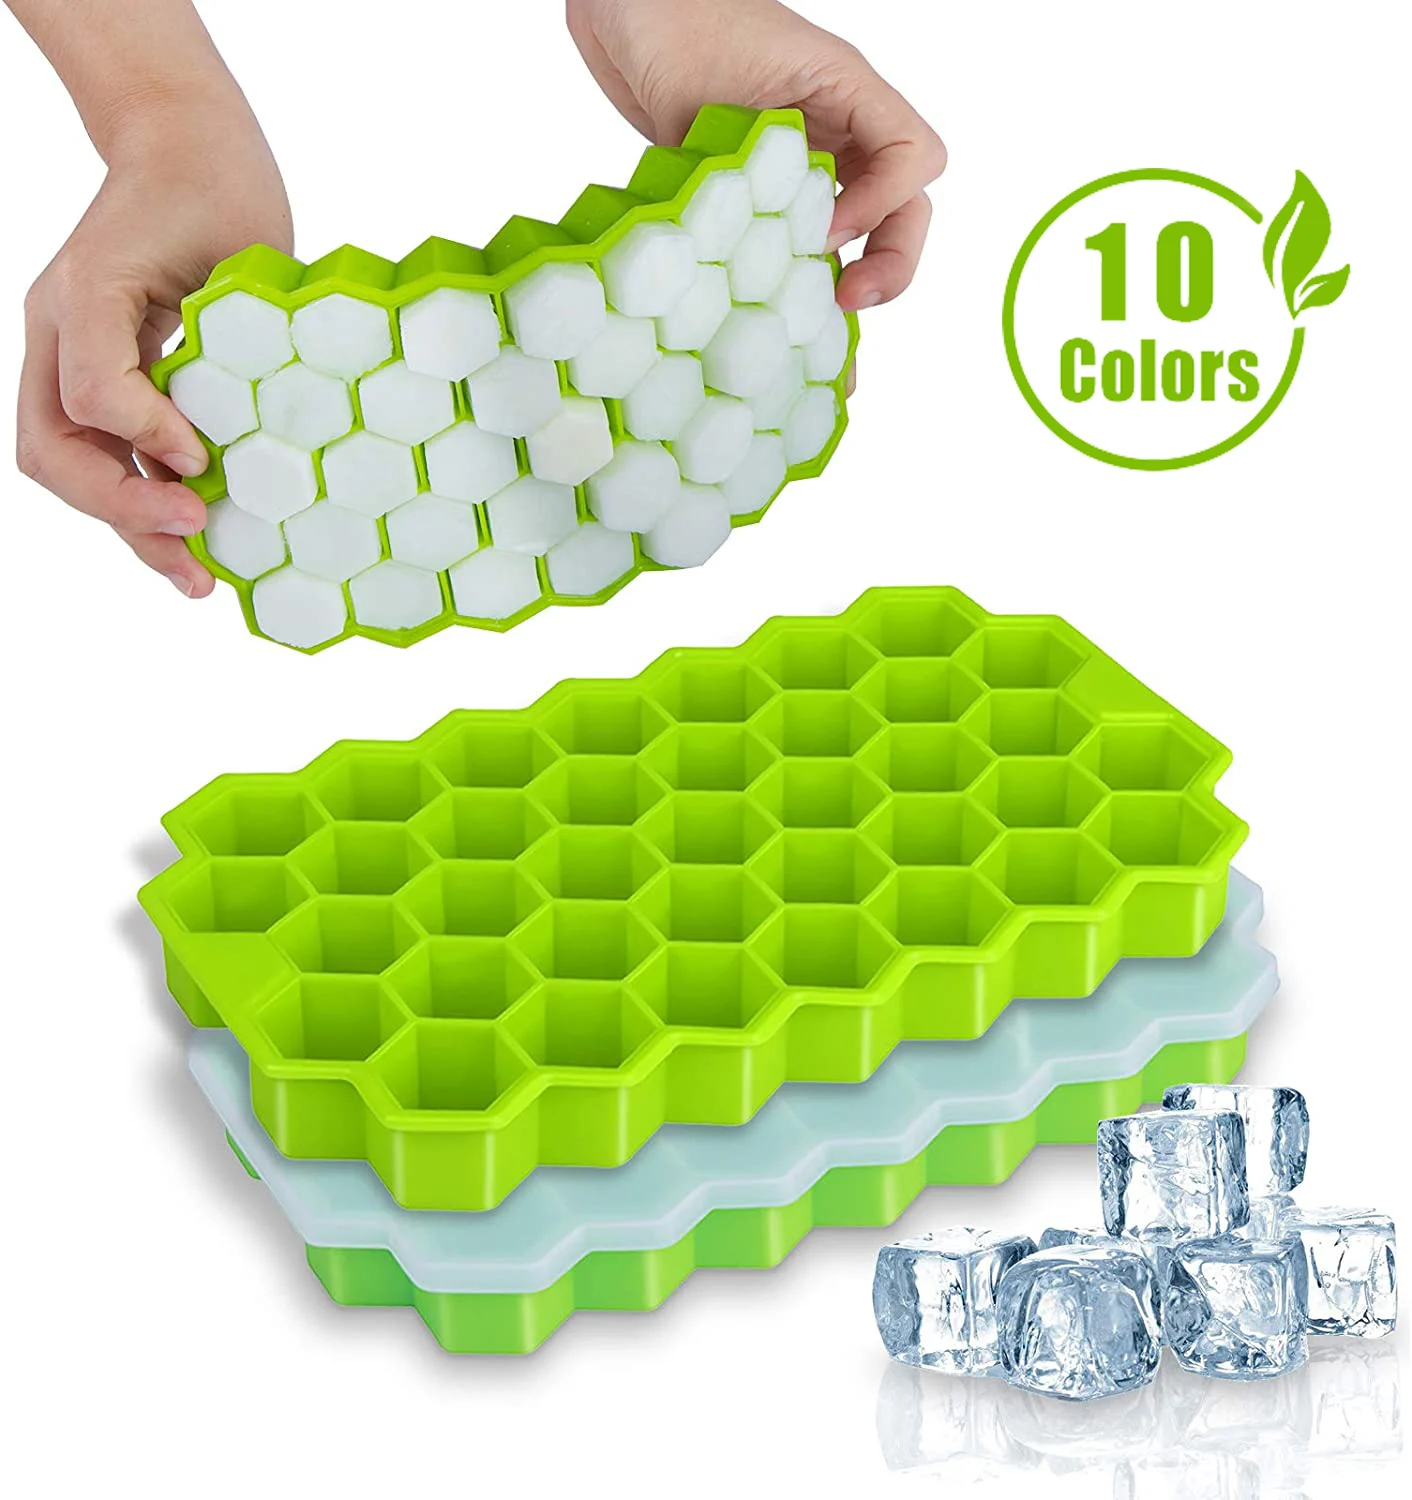 Maker Ice Cube Mold Cake Mould Kit DIY Household Silicone Round Jelly Tray LI 